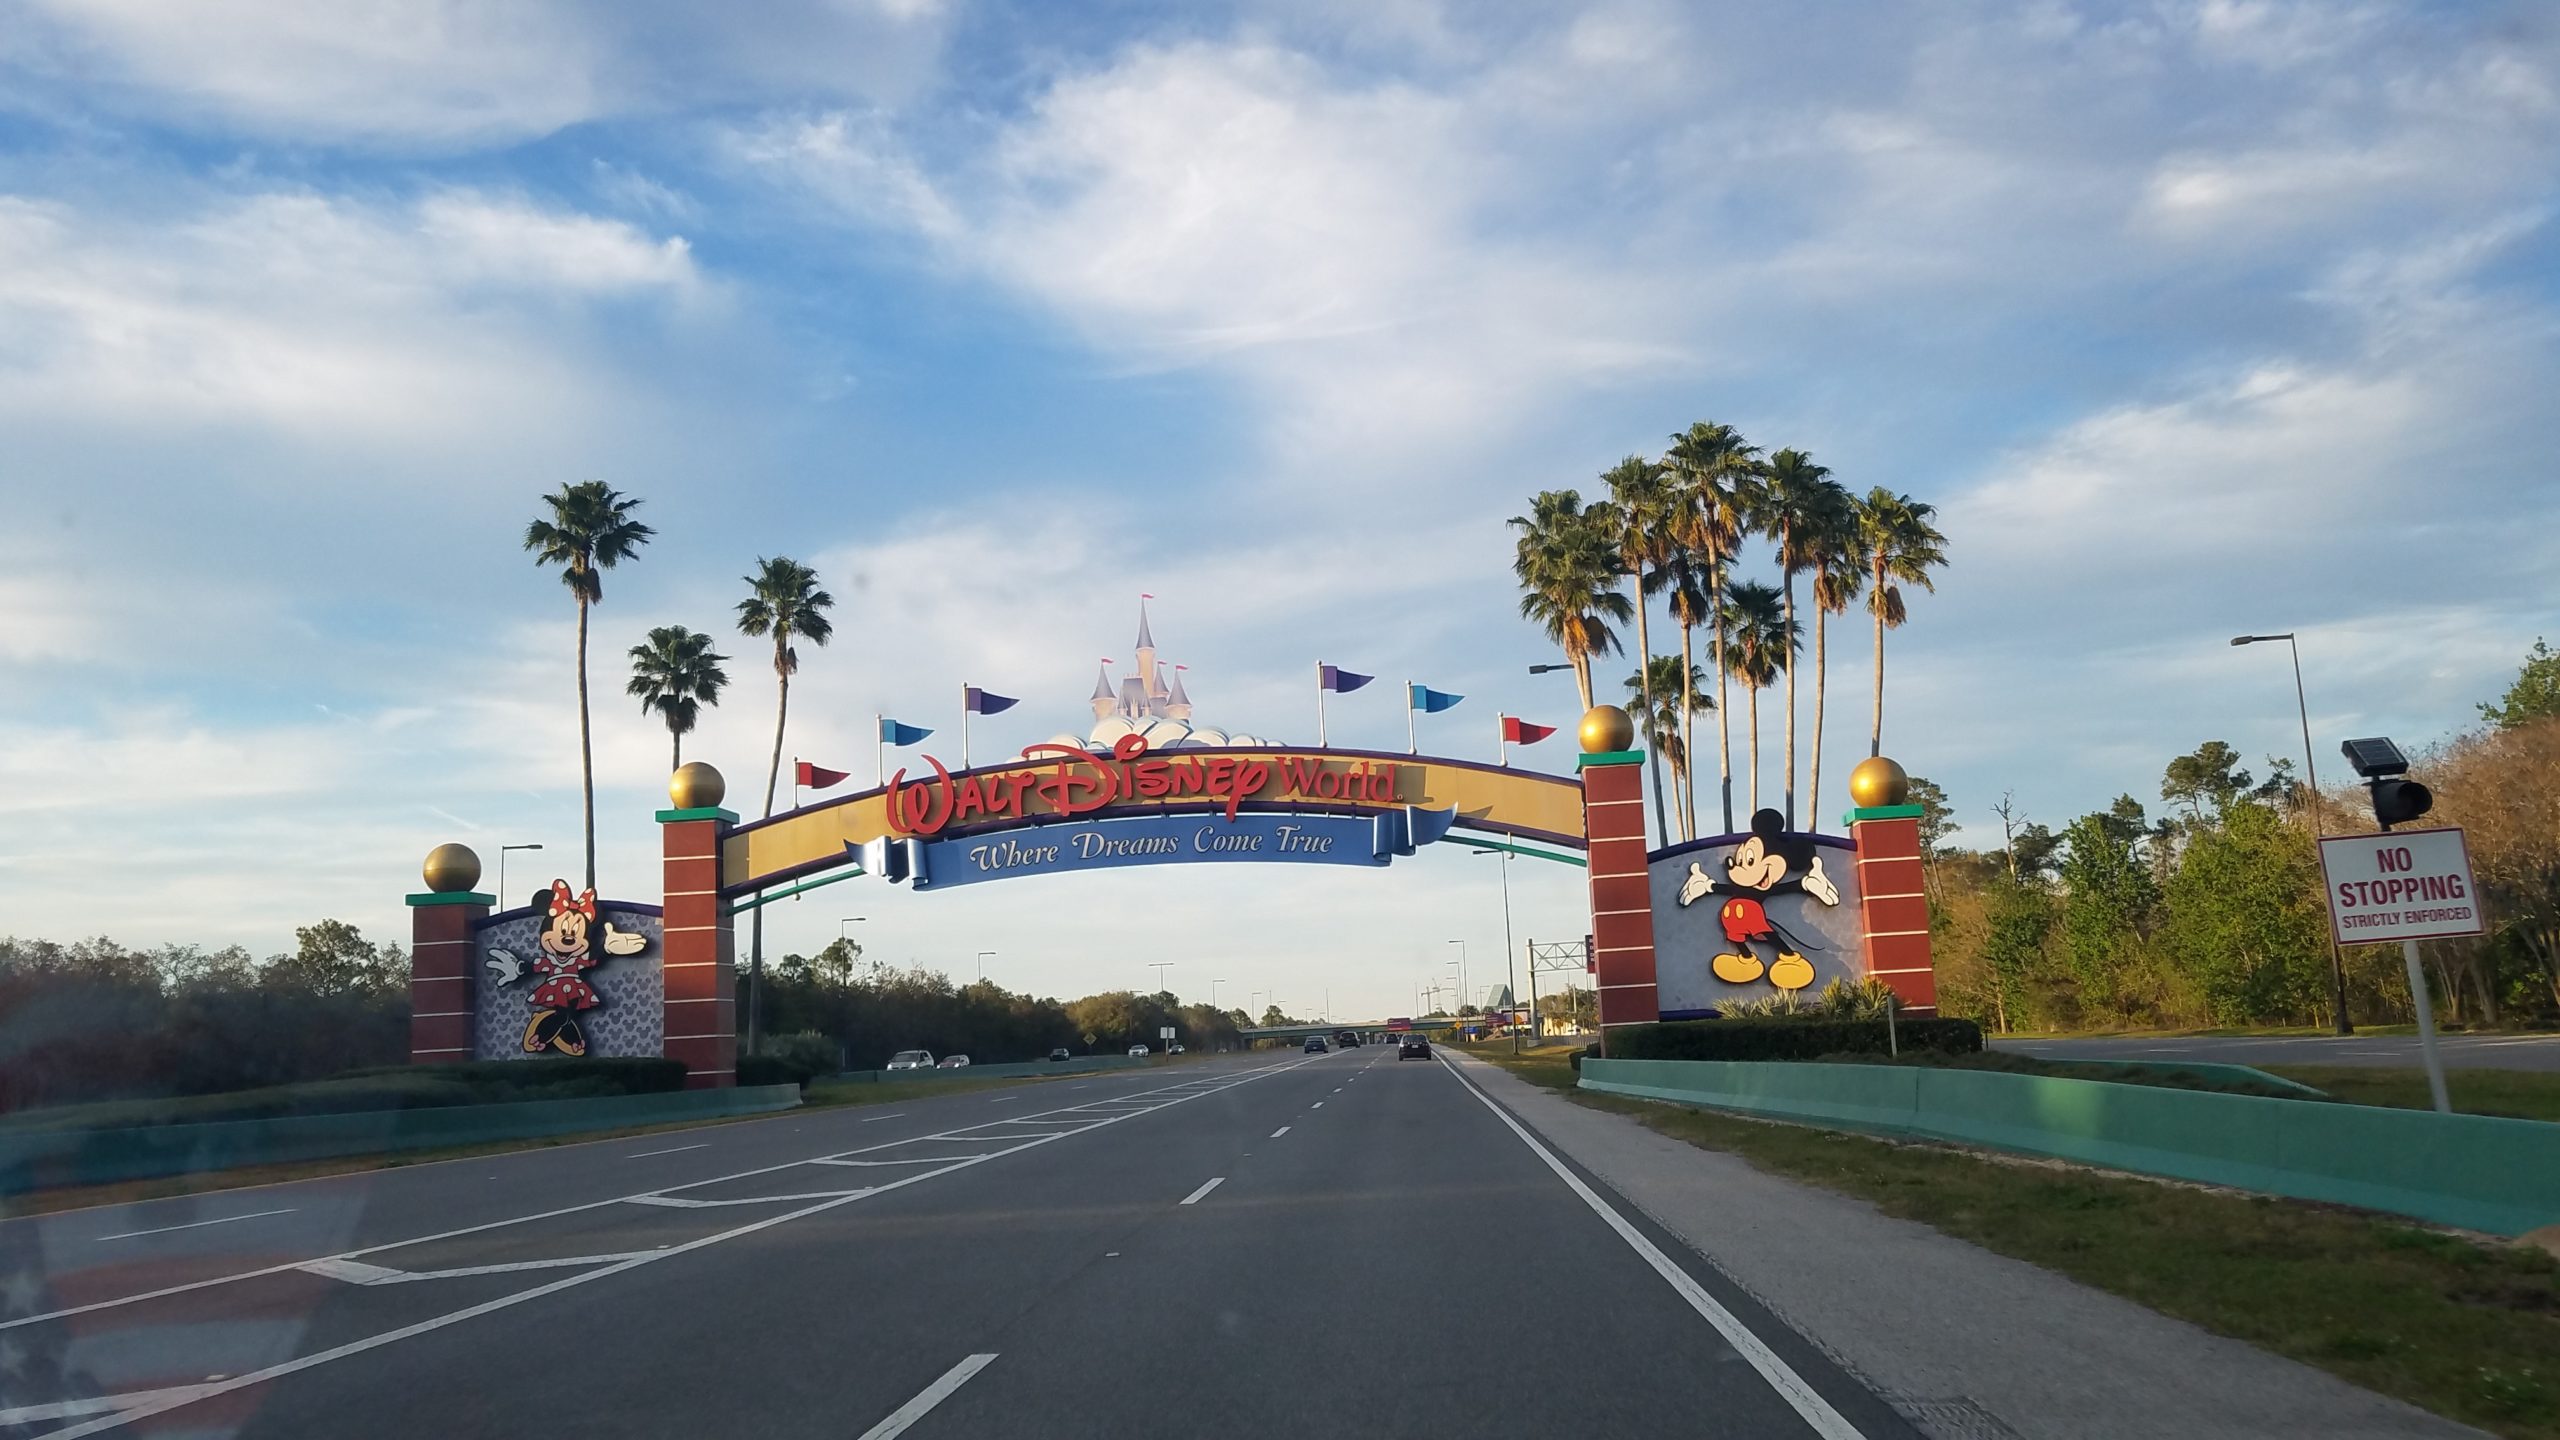 A dream come true at Disney World and RV Full-time tips